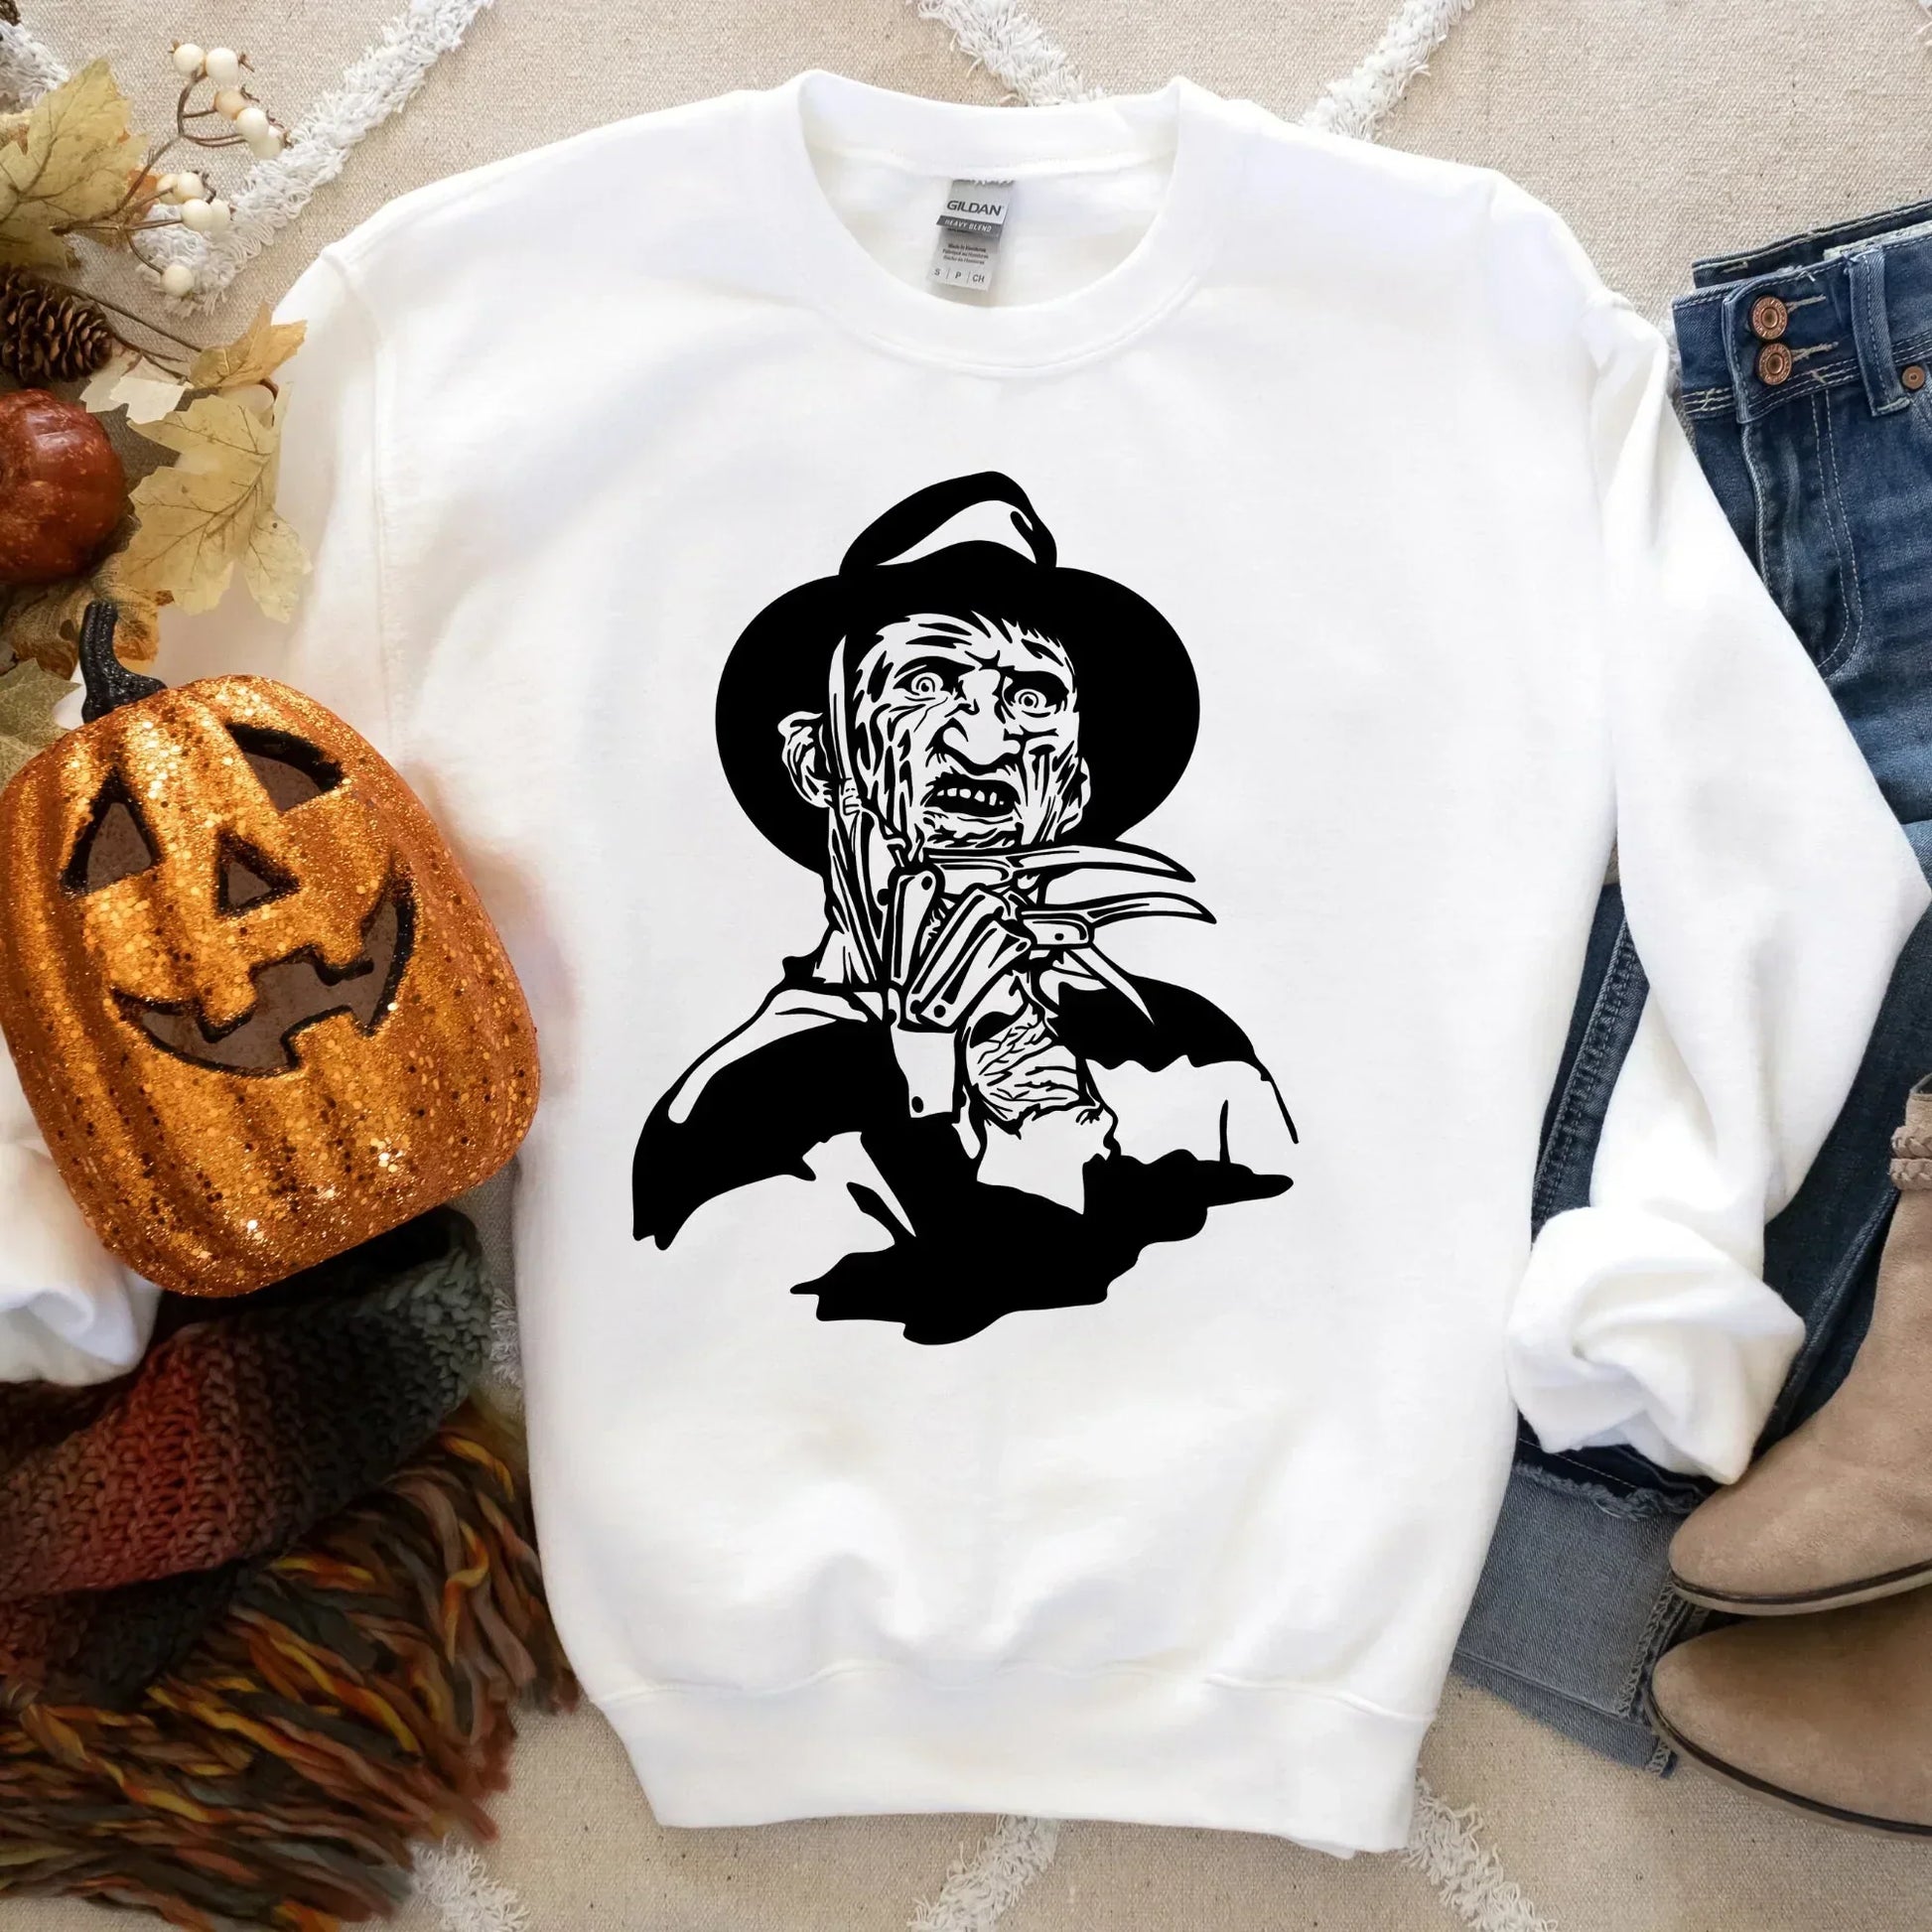 Freddy Horror Movie Shirt, Scary Sweater, Spooky Crewneck, Creepy Sweatshirt, Horror and Chill Lover, Fright Night Gift for Men Women